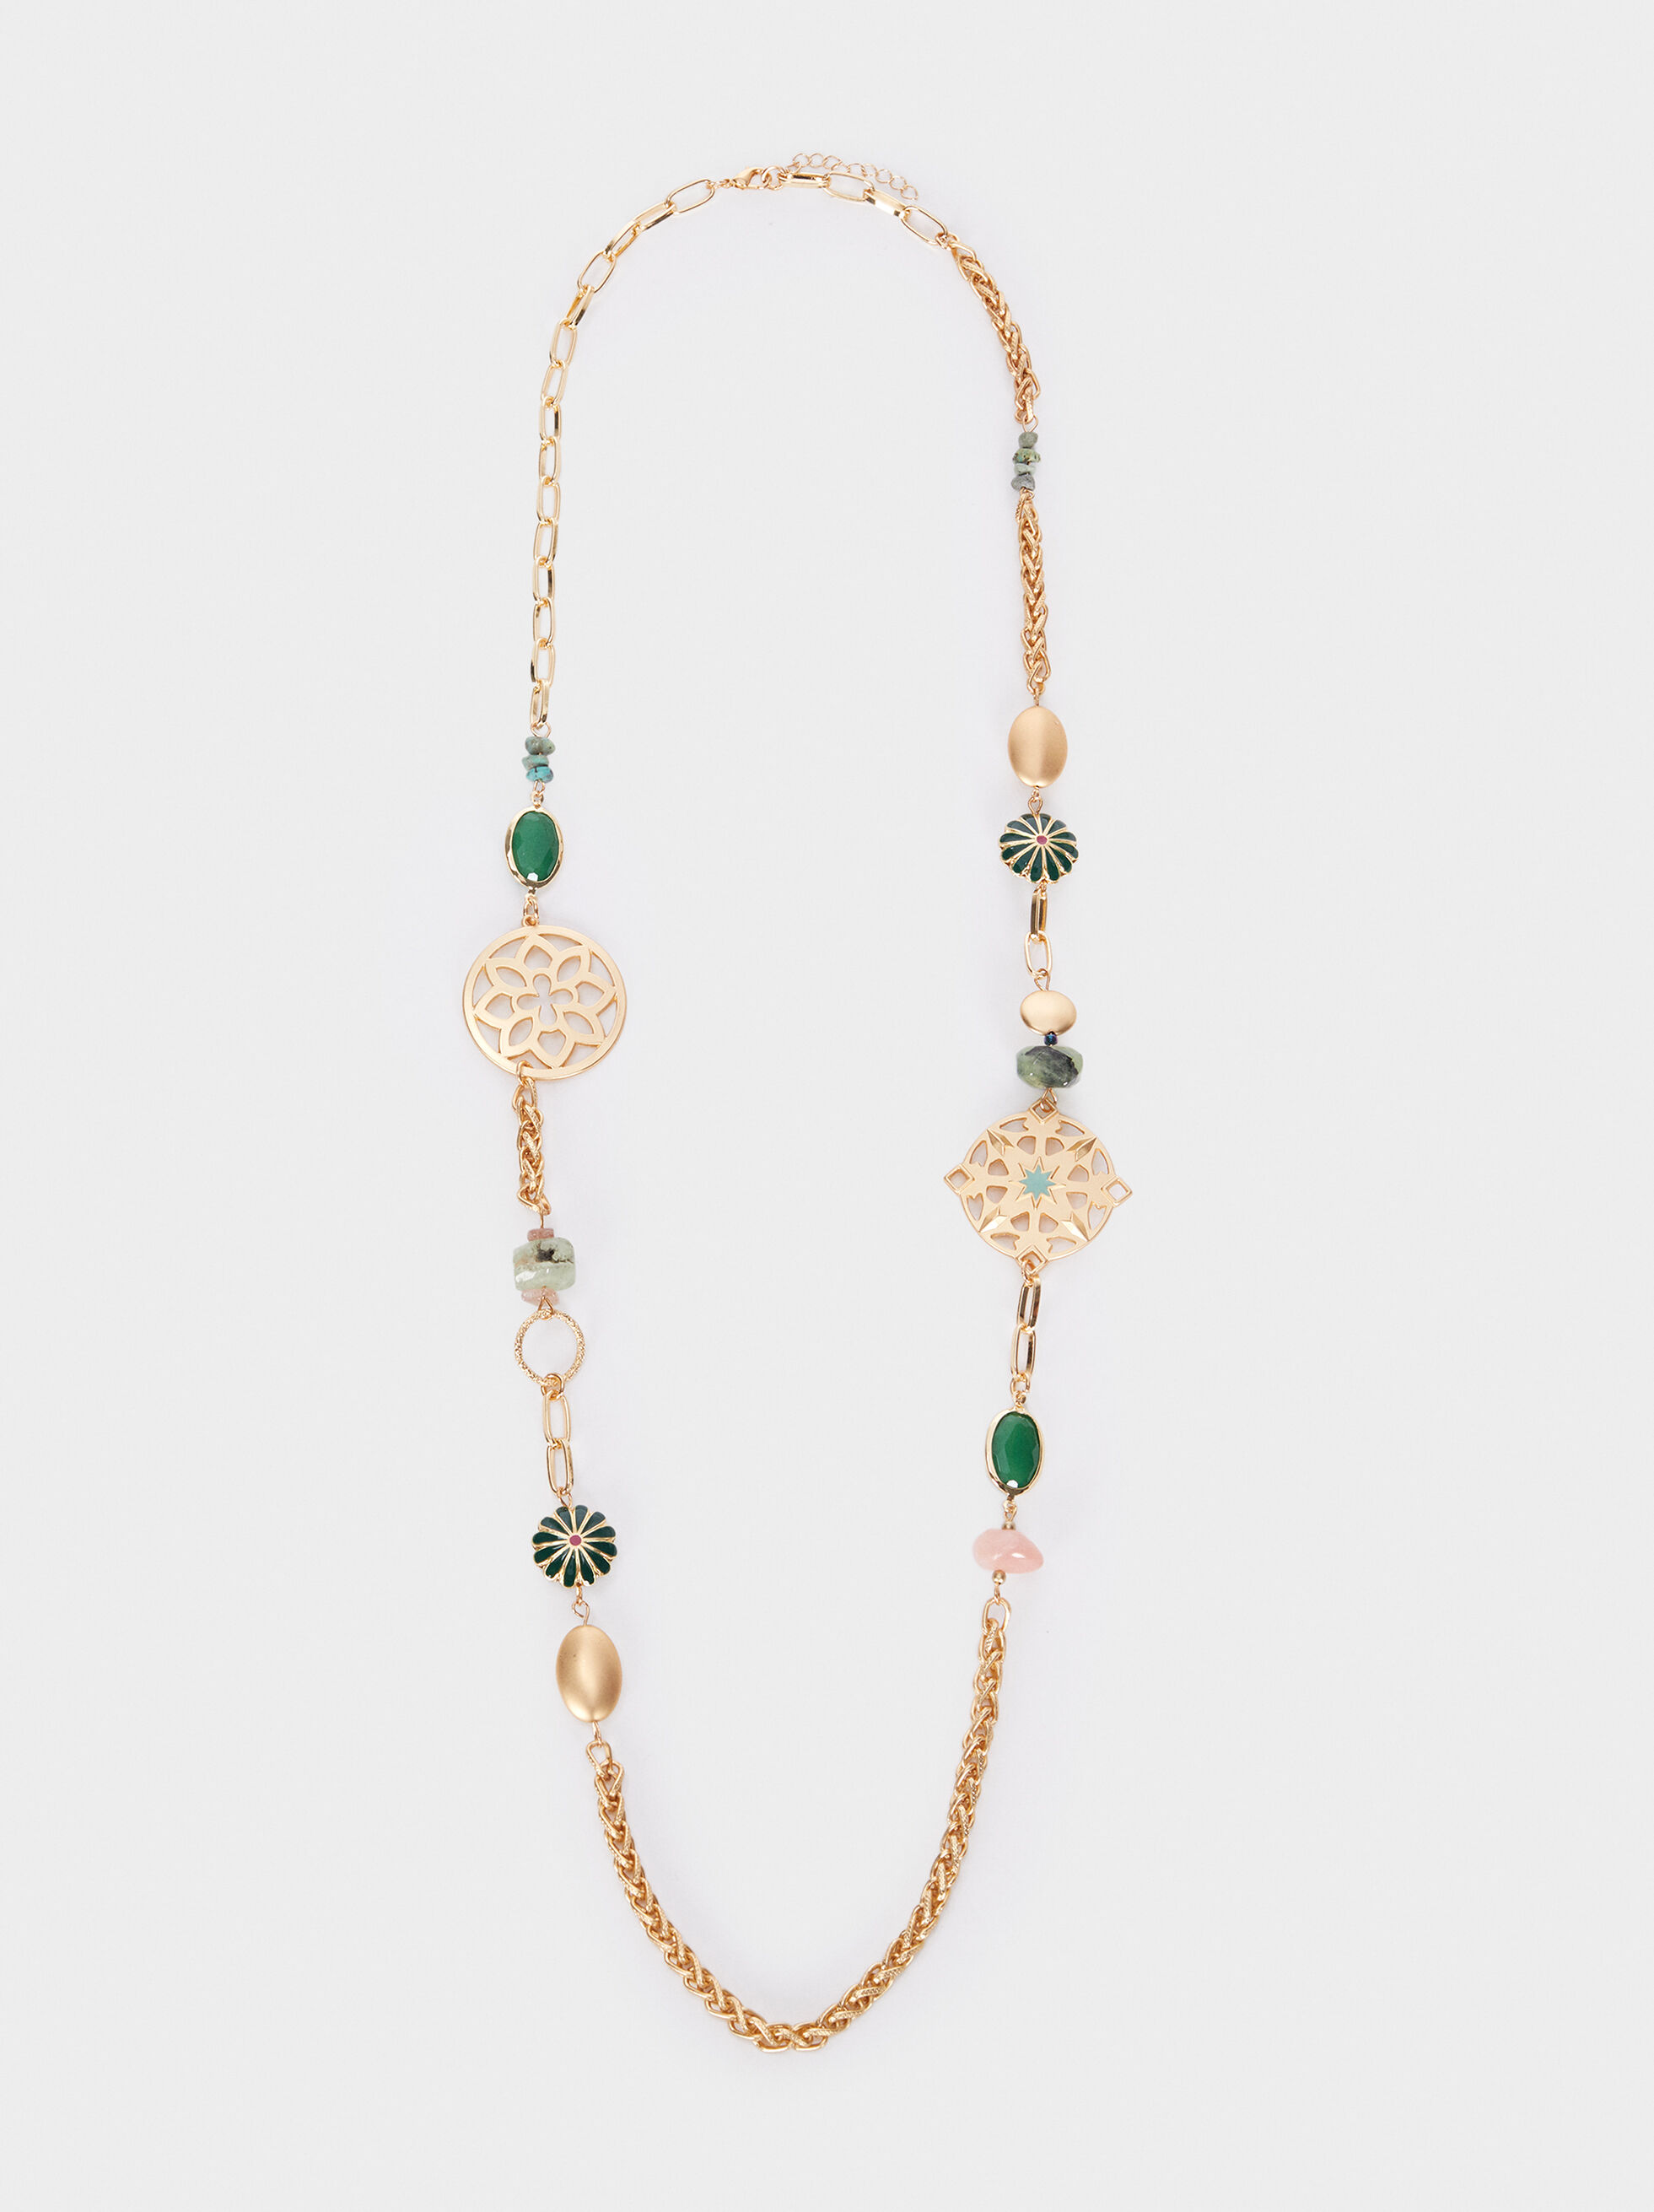 long gold necklace with stones